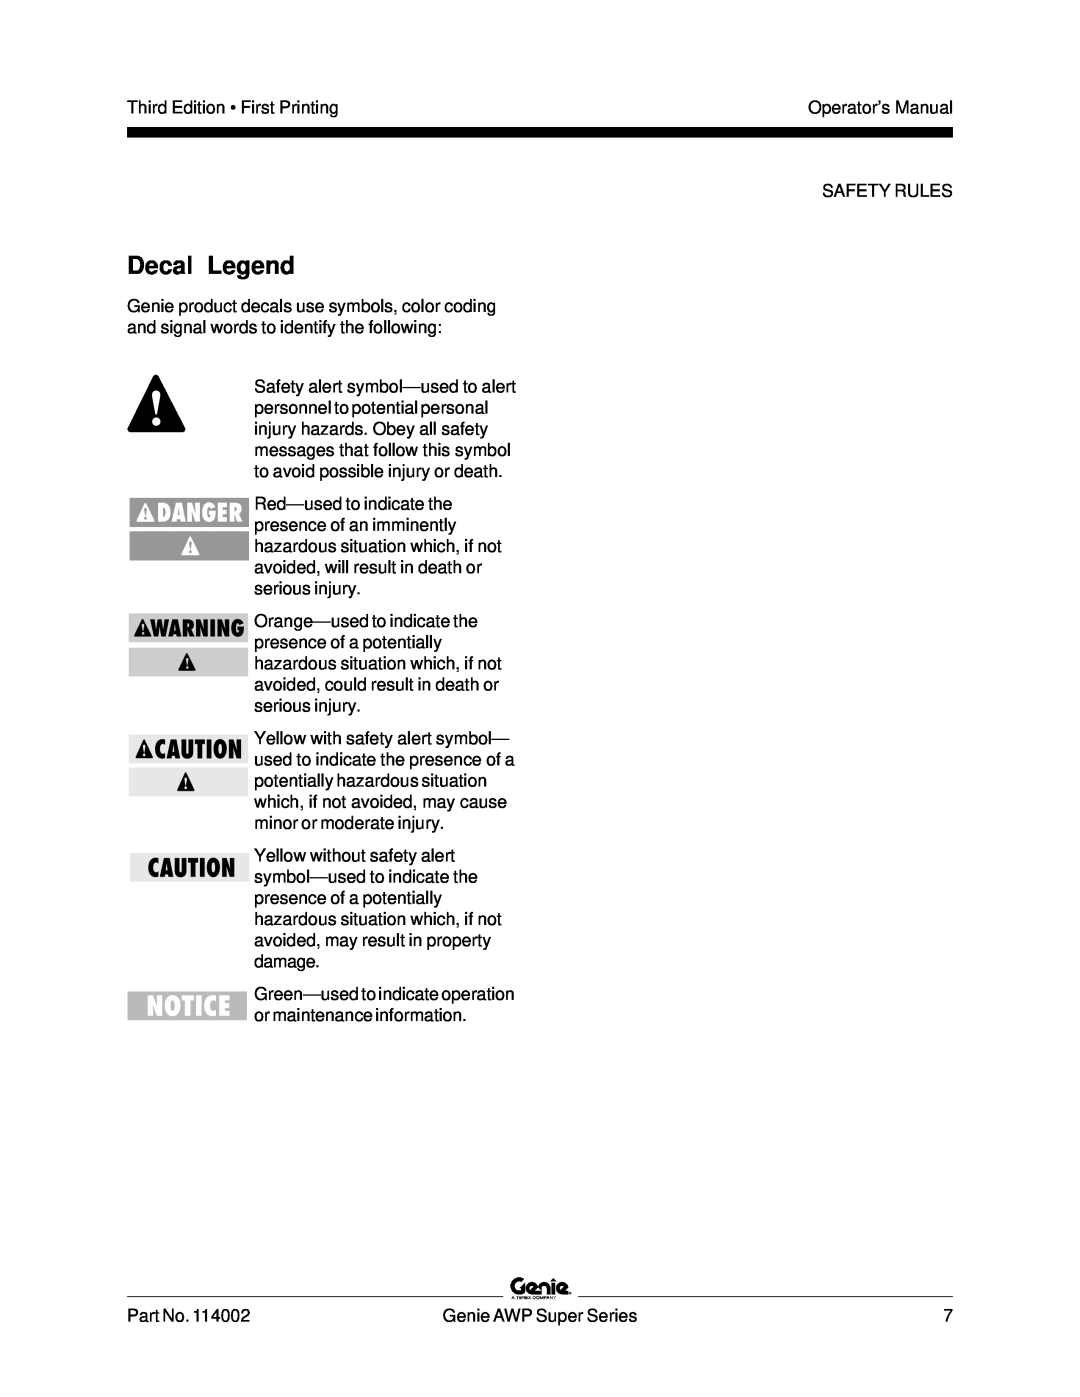 Genie 114002 manual Decal Legend, Green-used to indicate operation or maintenance information 